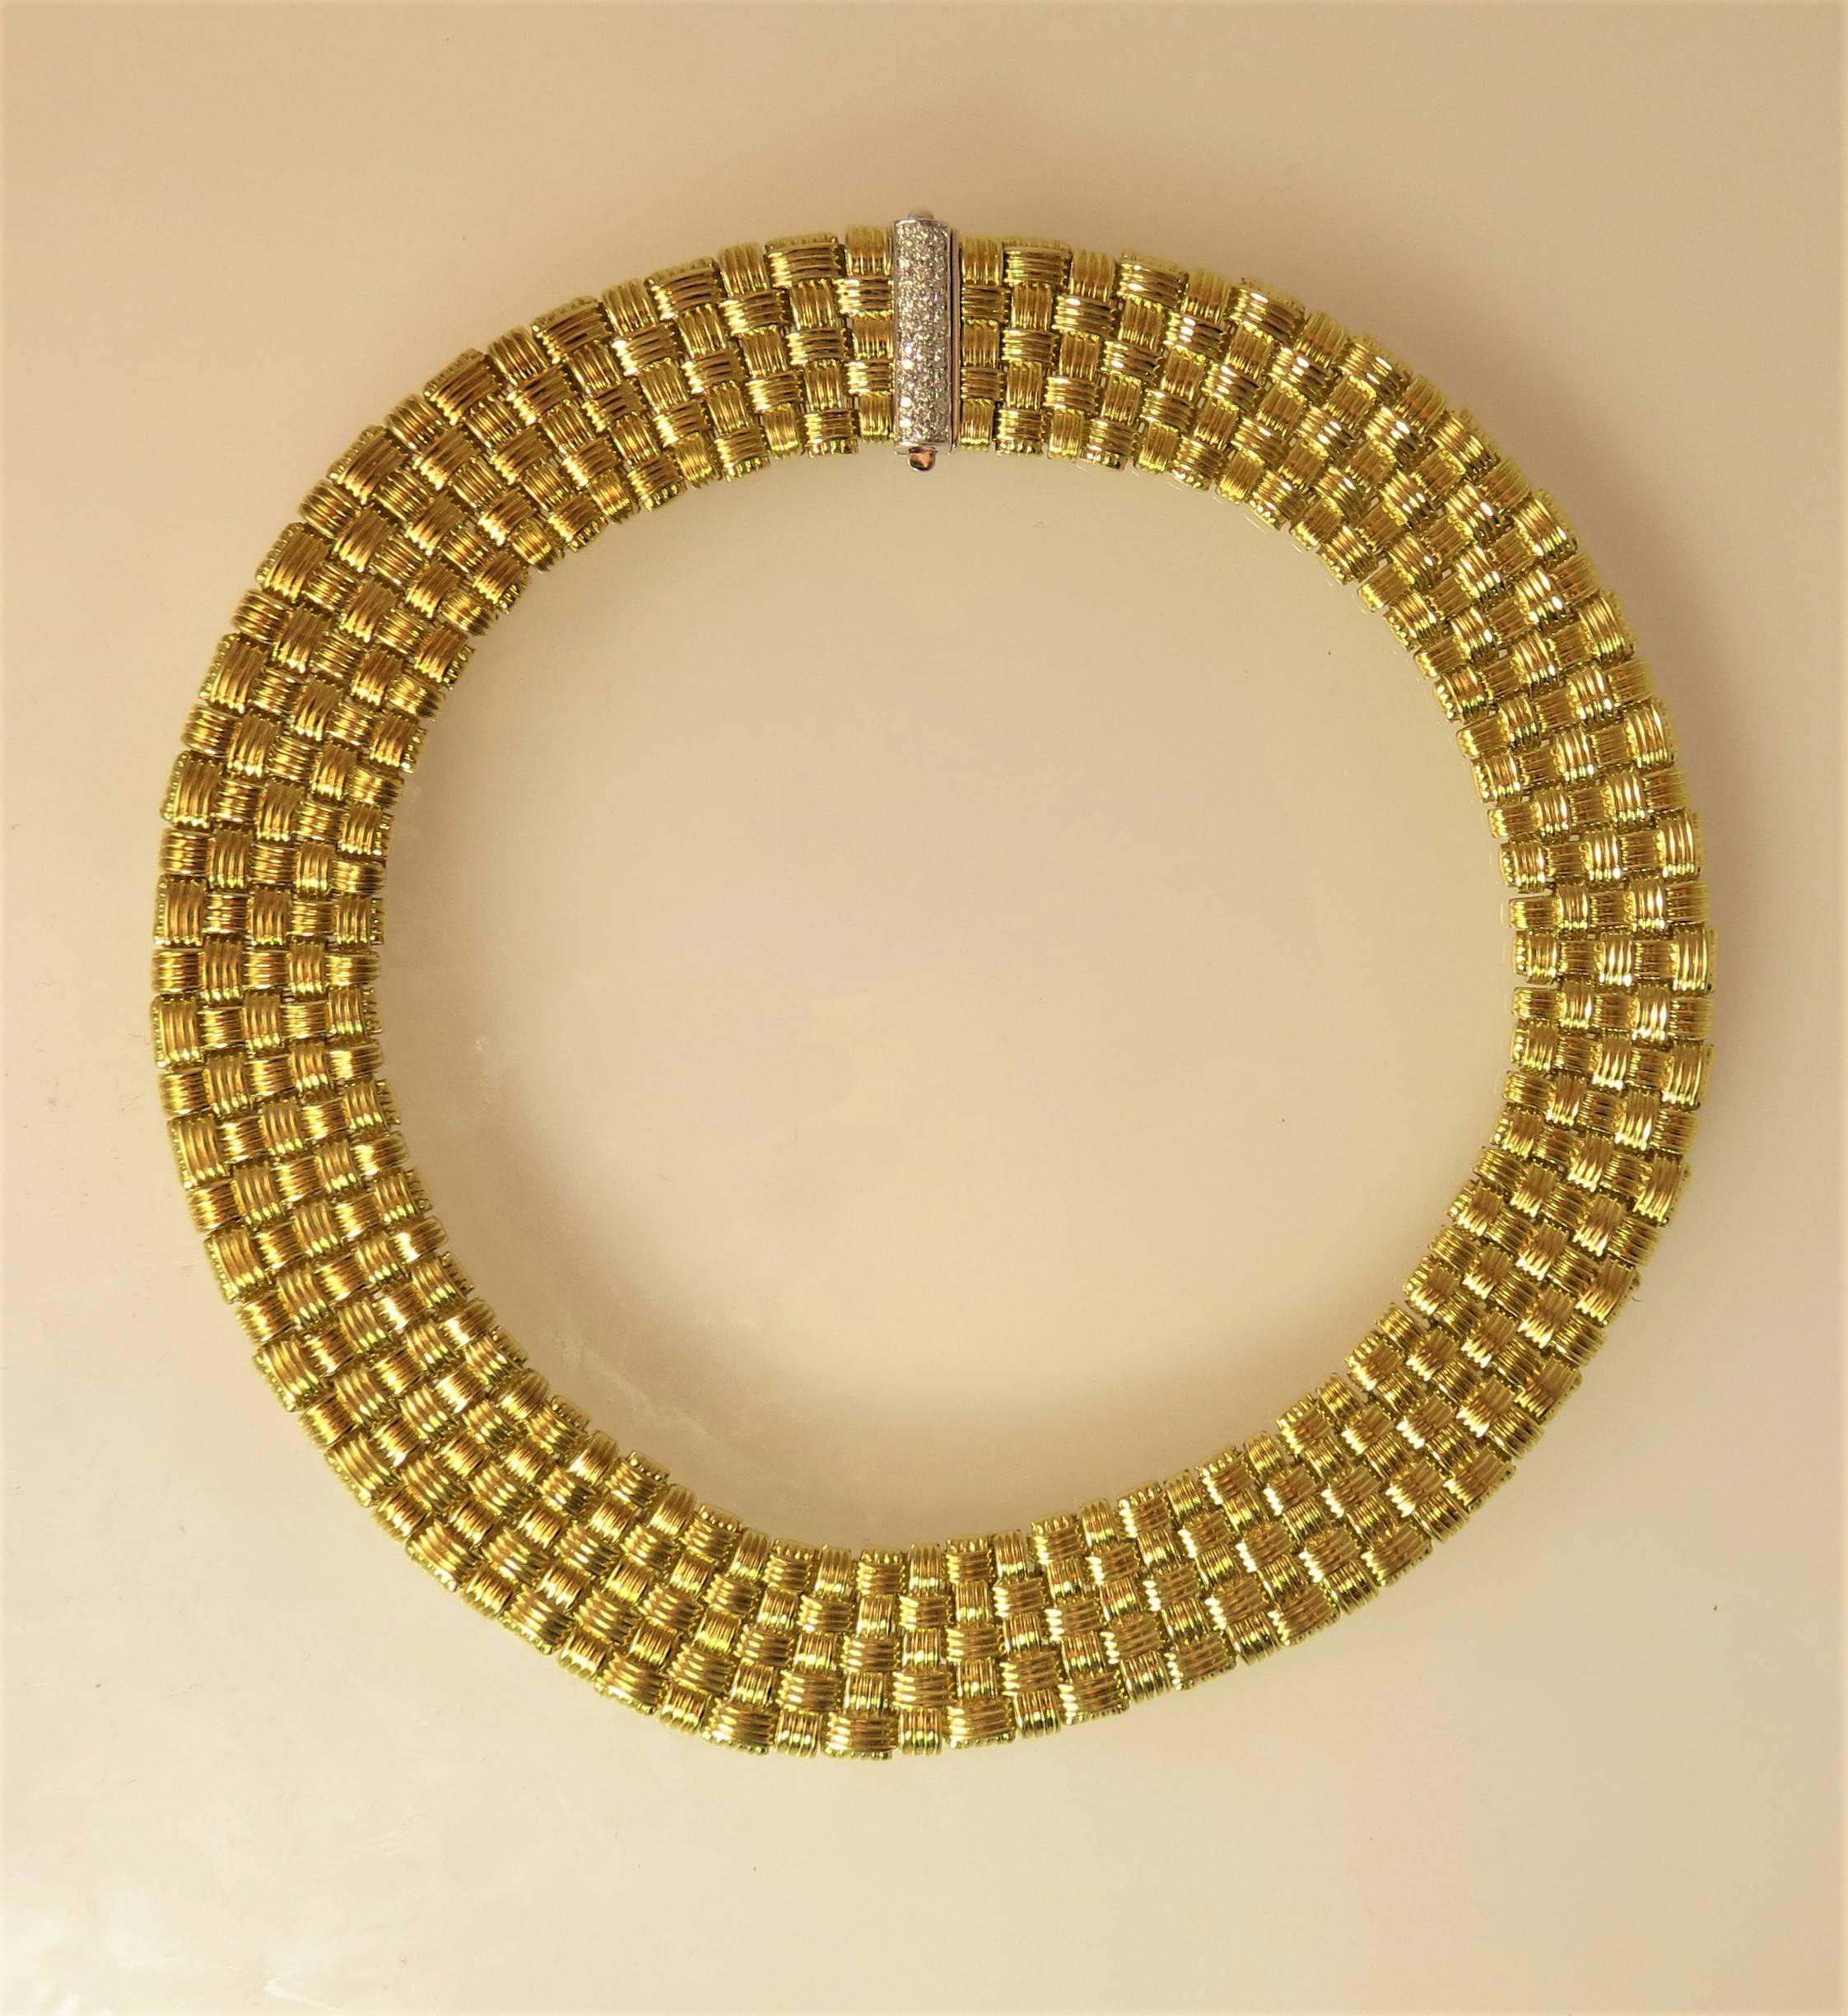 Fabulous Roberto Coin 18K yellow gold APPASSIONATA 5 row necklace with diamond clasp, with 31 full cut round diamonds weighing .39cts.